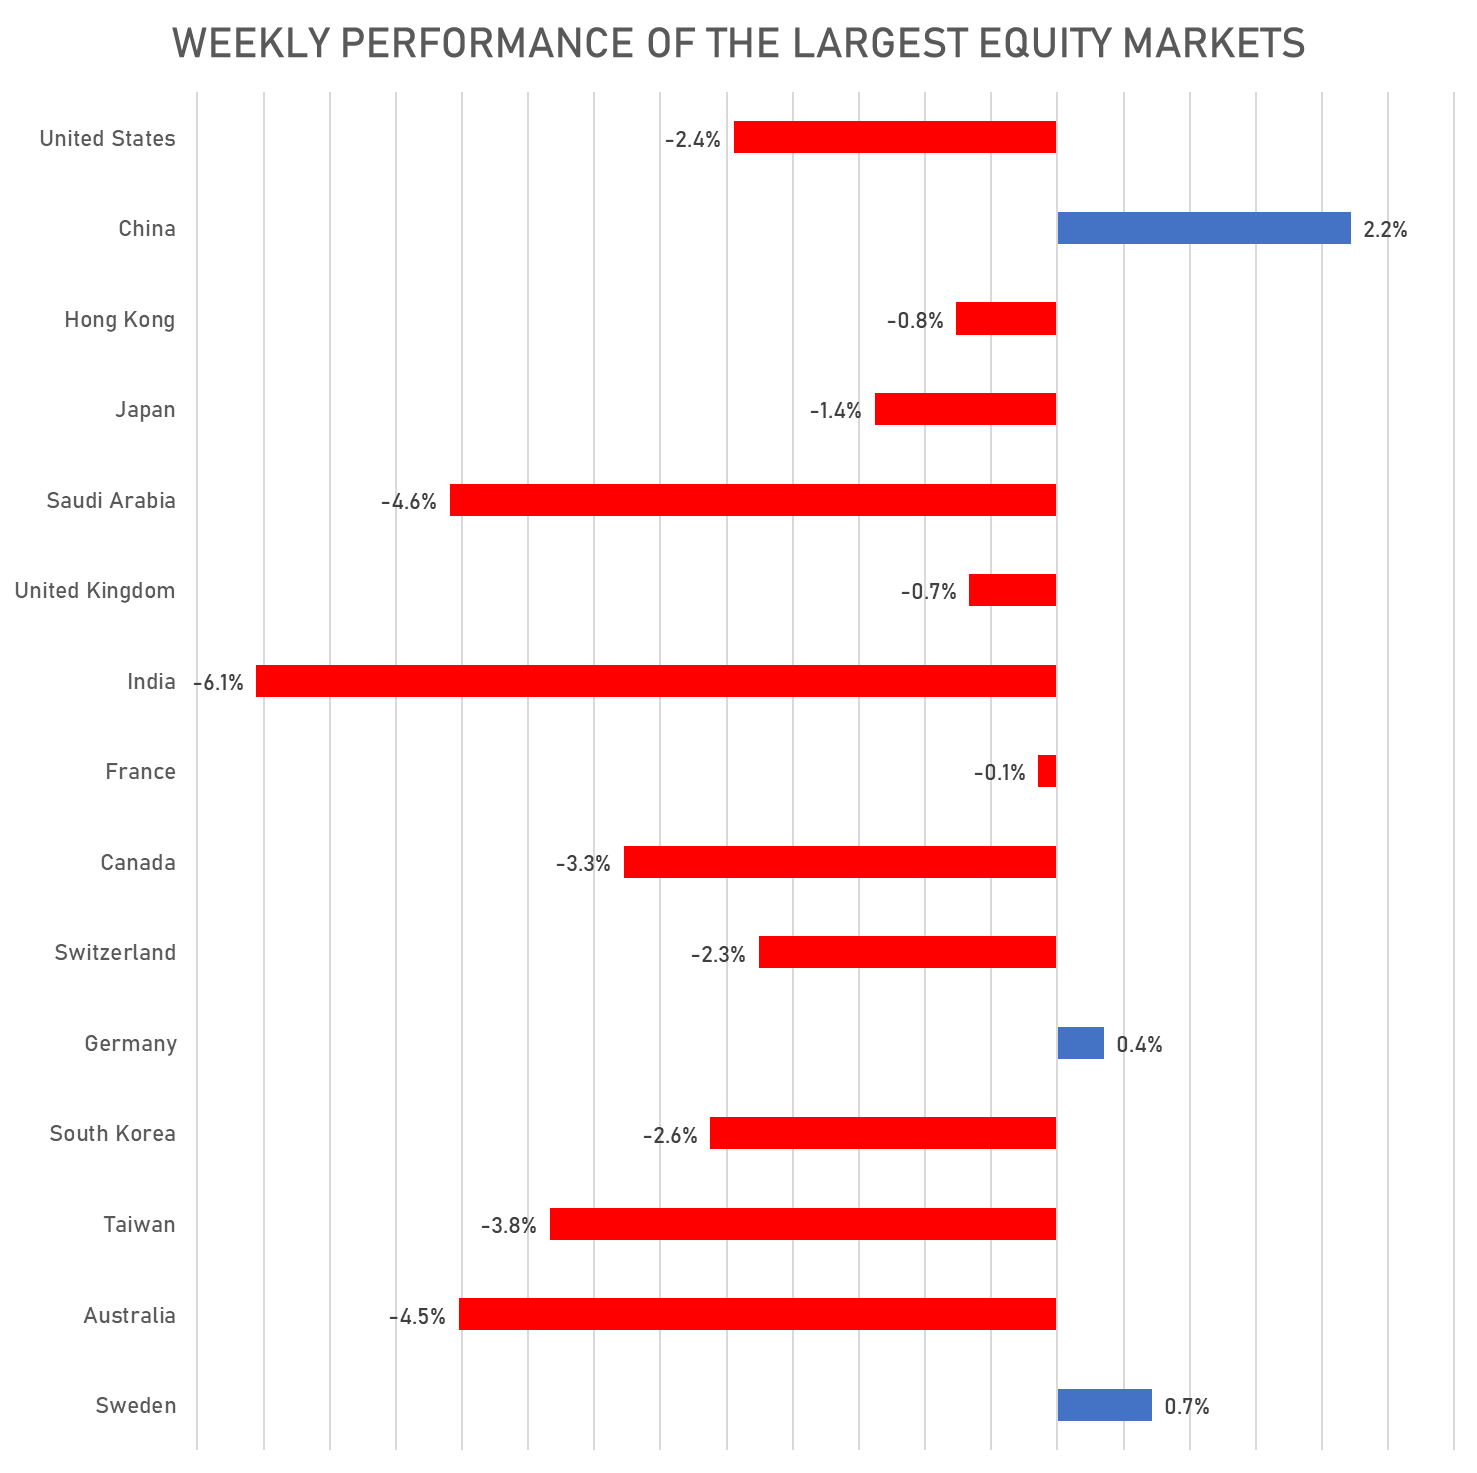 Weekly Total Returns Of The Largest Global Markets | Sources: phipost.com, FactSet data